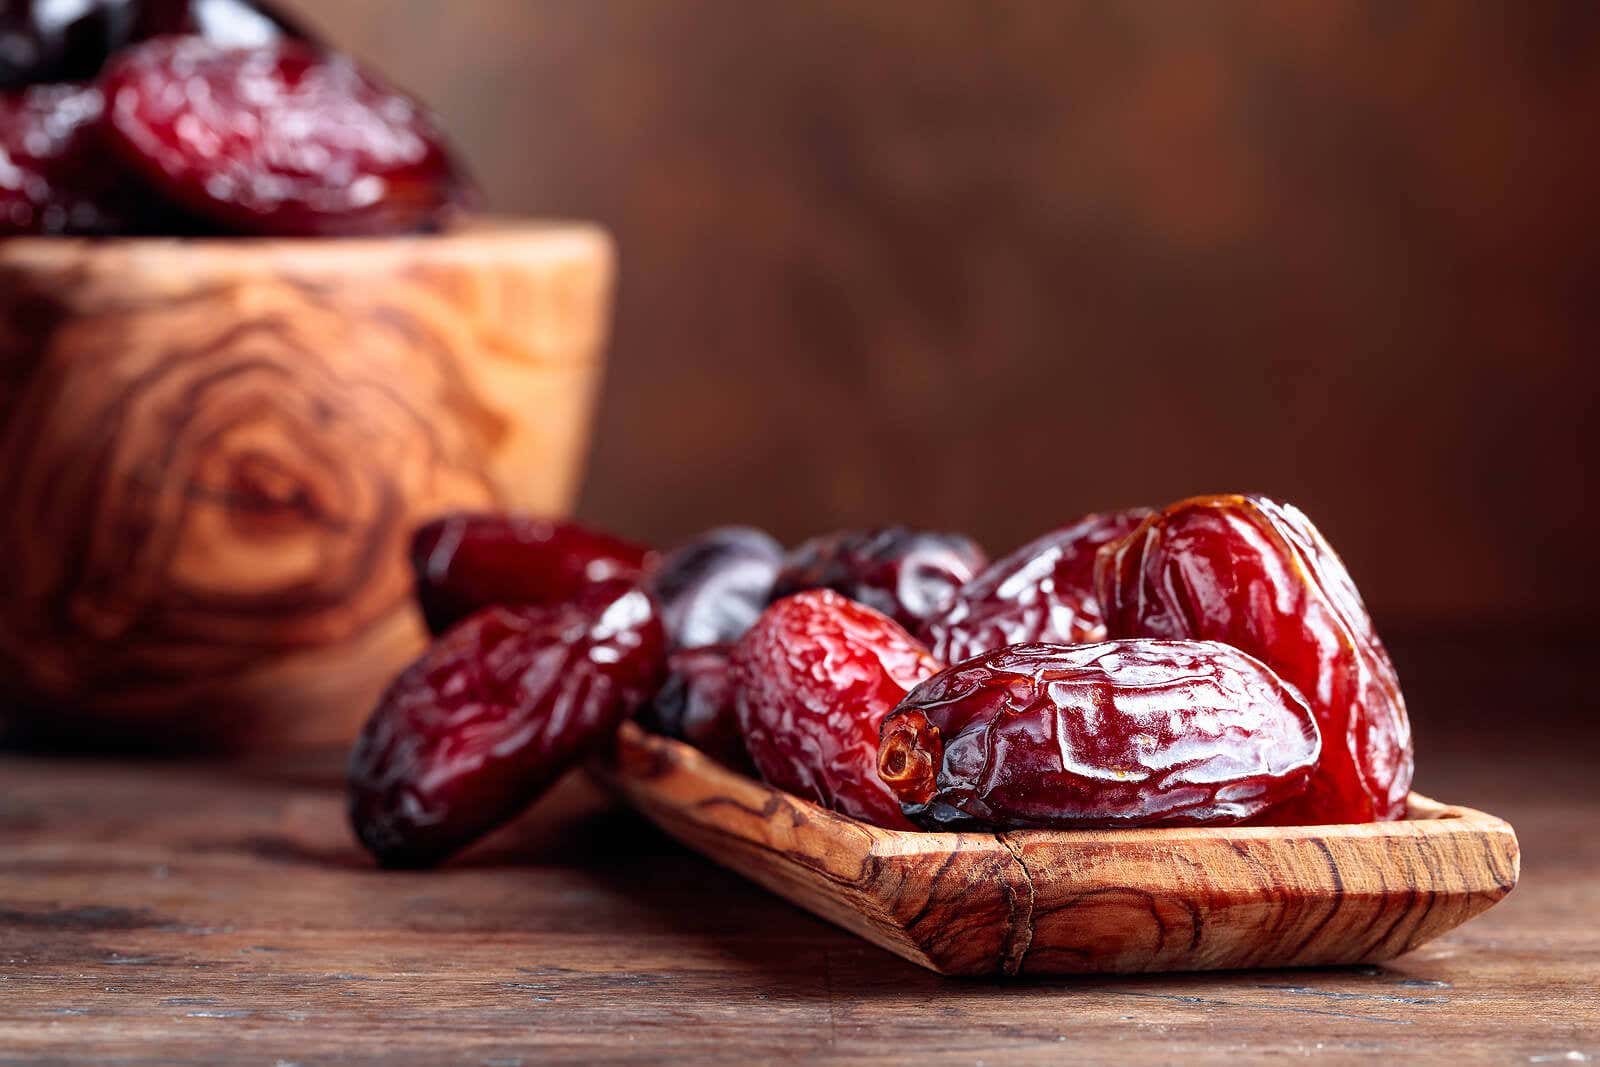 Dates are foods with phytoestrogens